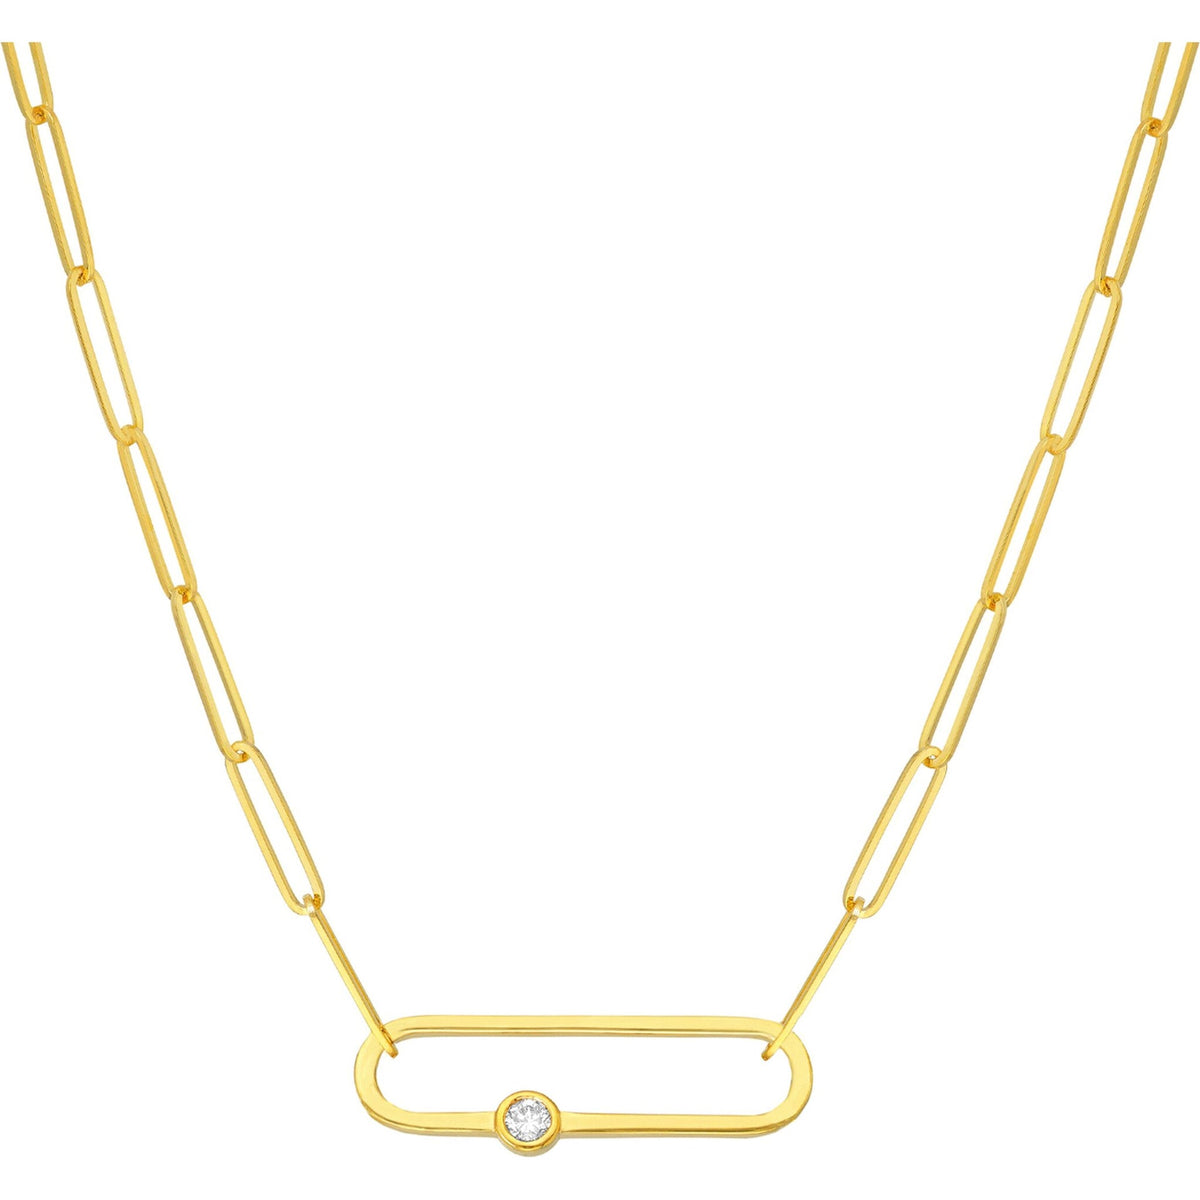 Elegant Paper Clip Necklace from Robinson's Jewelers